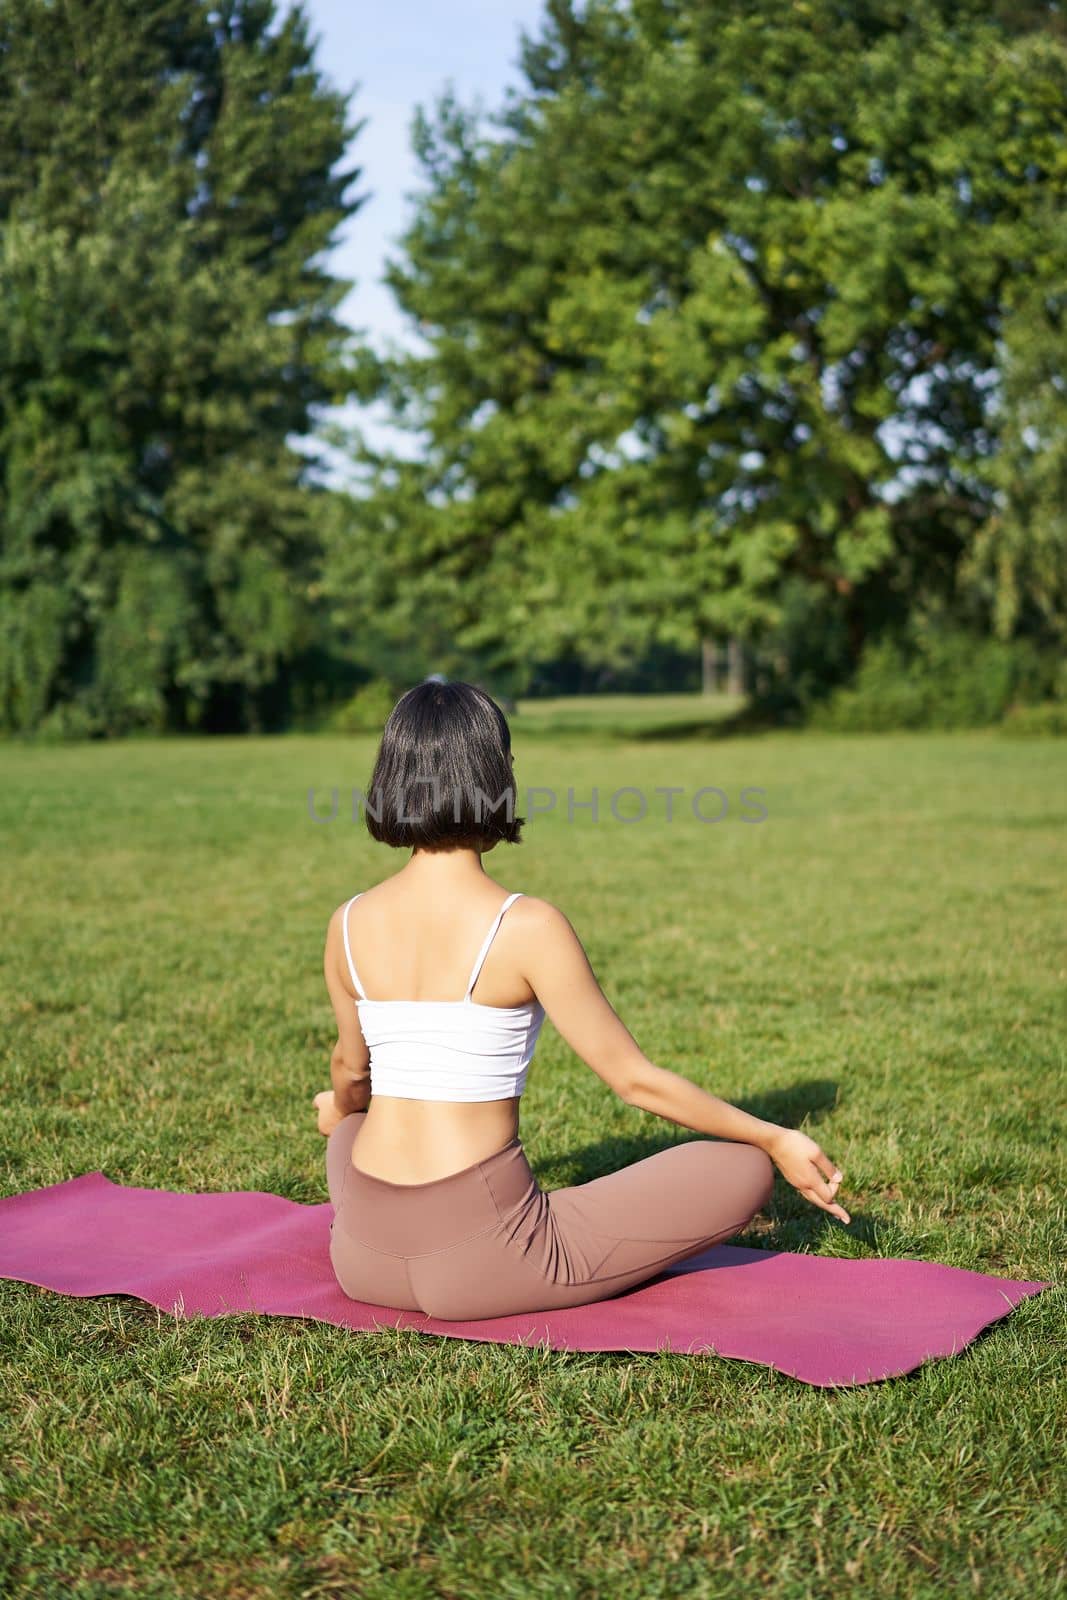 Rear view of woman silhouette doing yoga, sitting on fitness mat and meditating on green lawn.